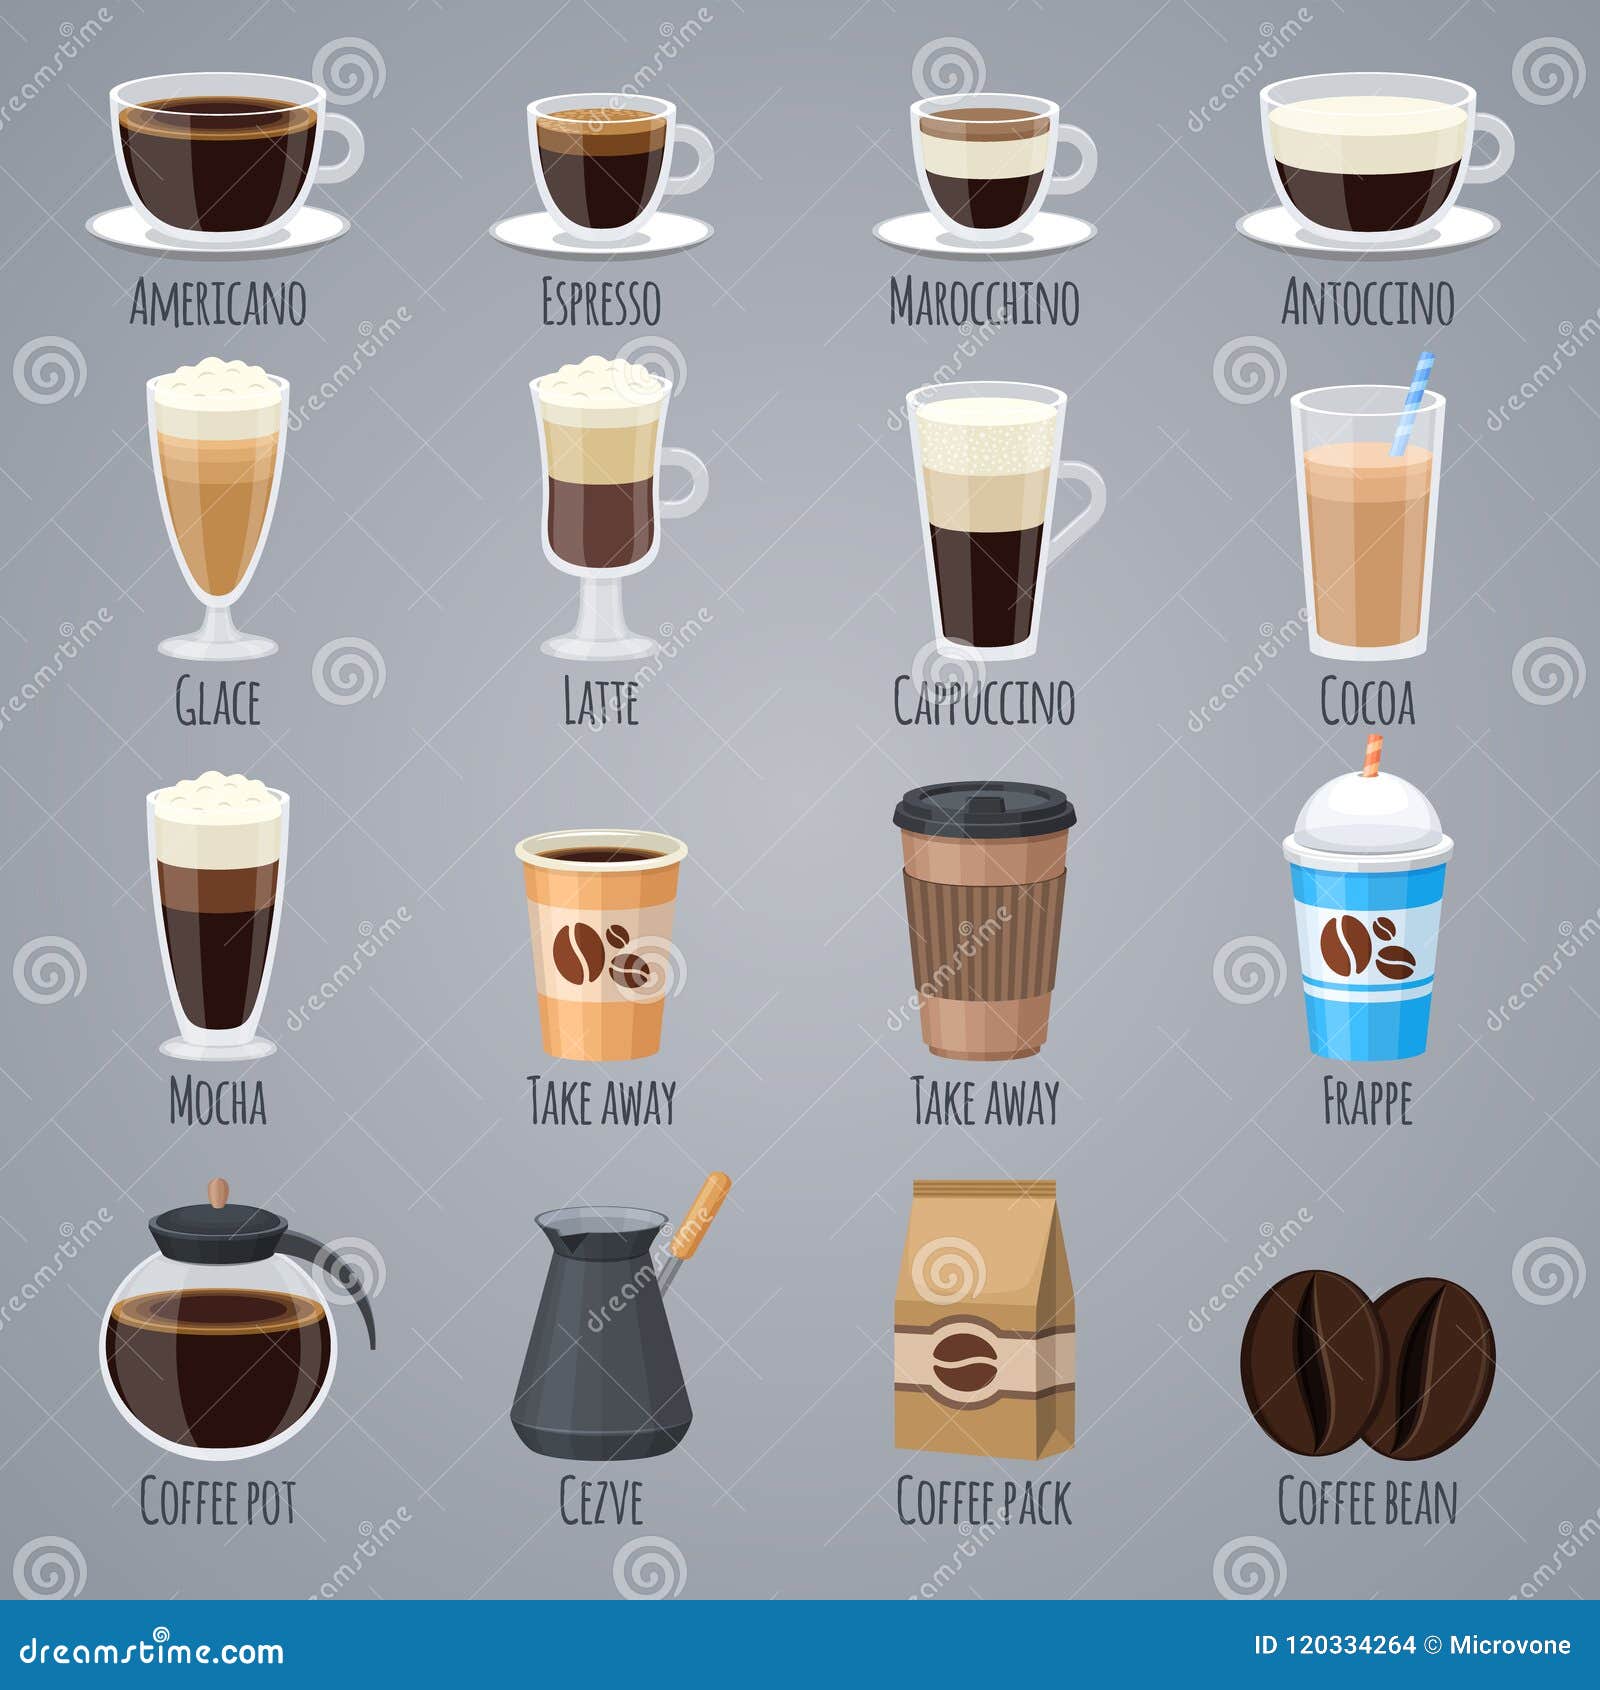 espresso, latte, cappuccino in glasses and mugs. coffee types for coffee house menu. flat  icons set